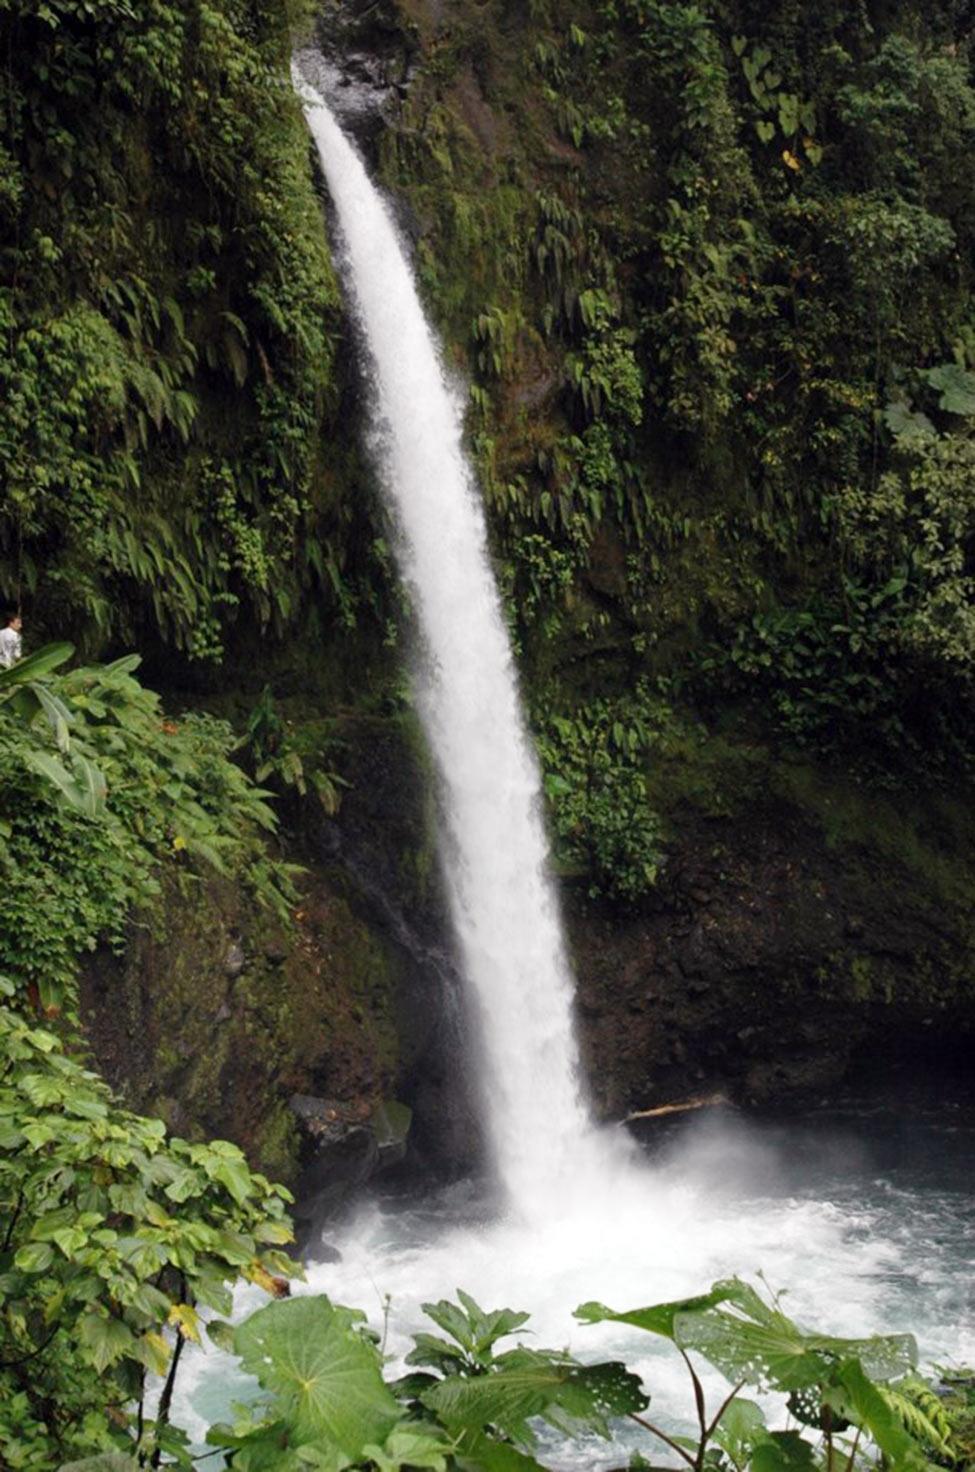 Waterfall in a managed forest near the University of Peace in Costa Rica for Pace University's 3+2 Biology with Ecology and Society program